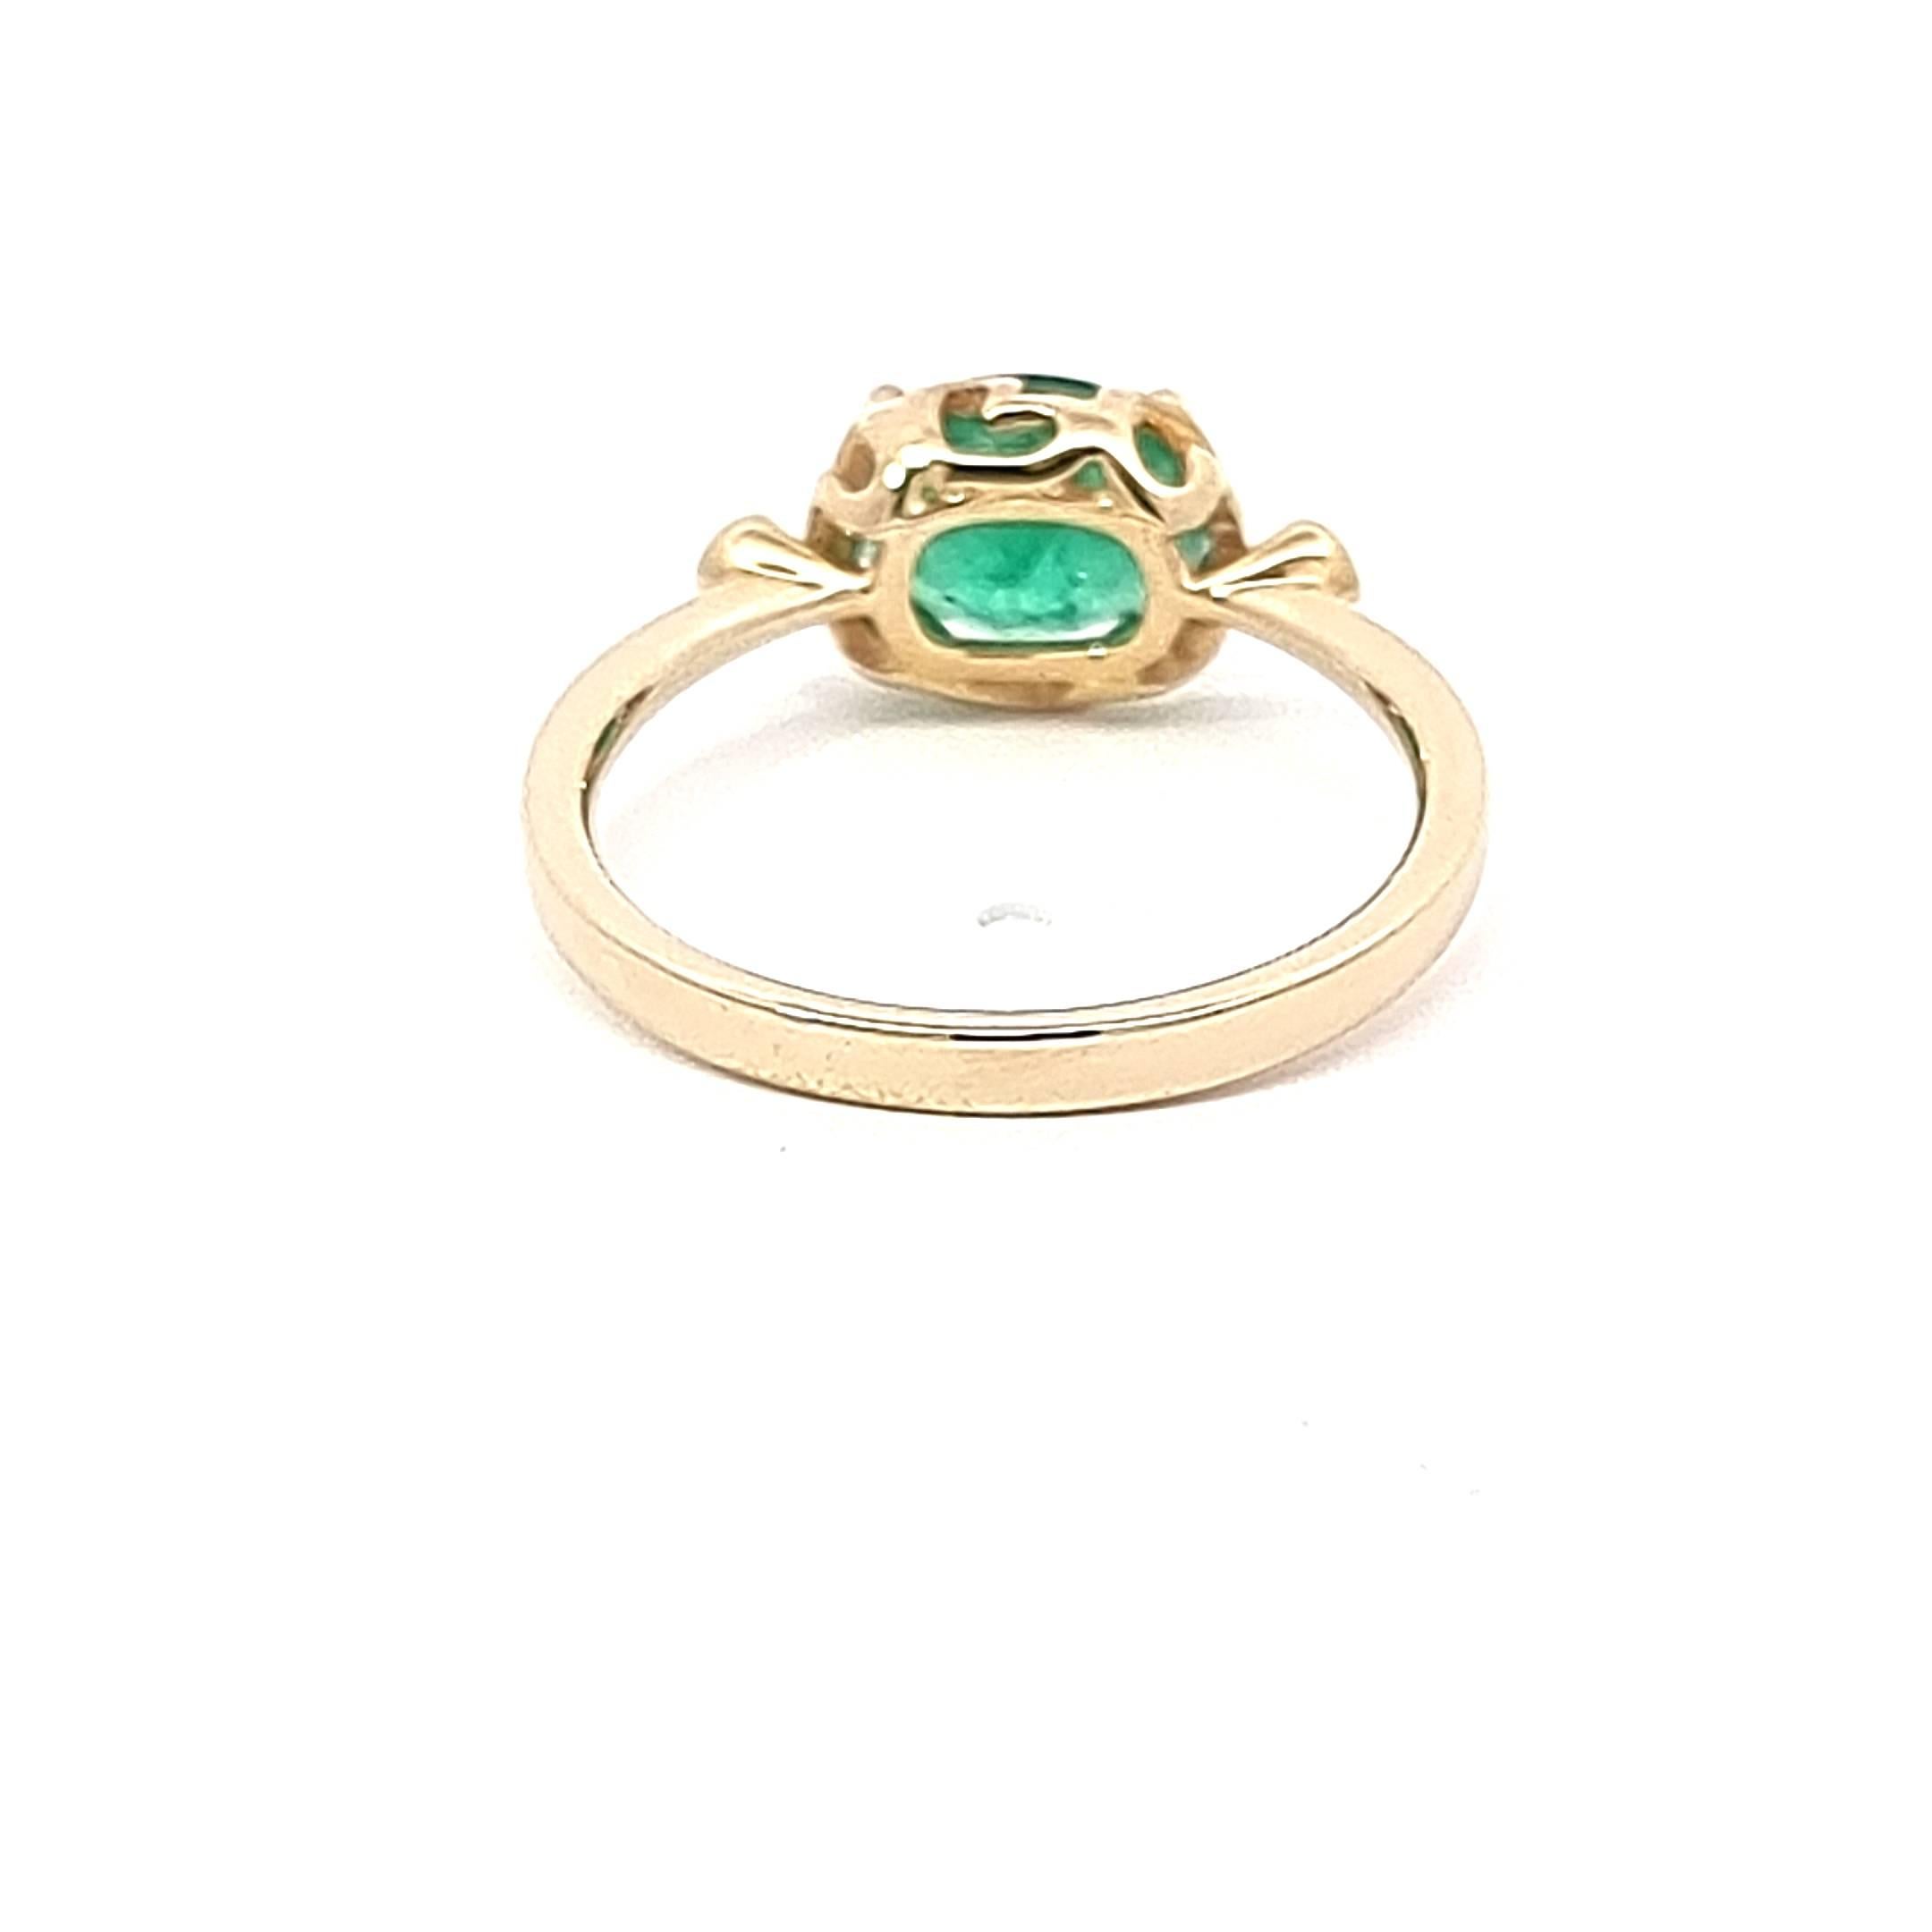 Oval Cut Stunning Oval Emerald Ring with Two White Diamonds on the Side in 14K Gold For Sale